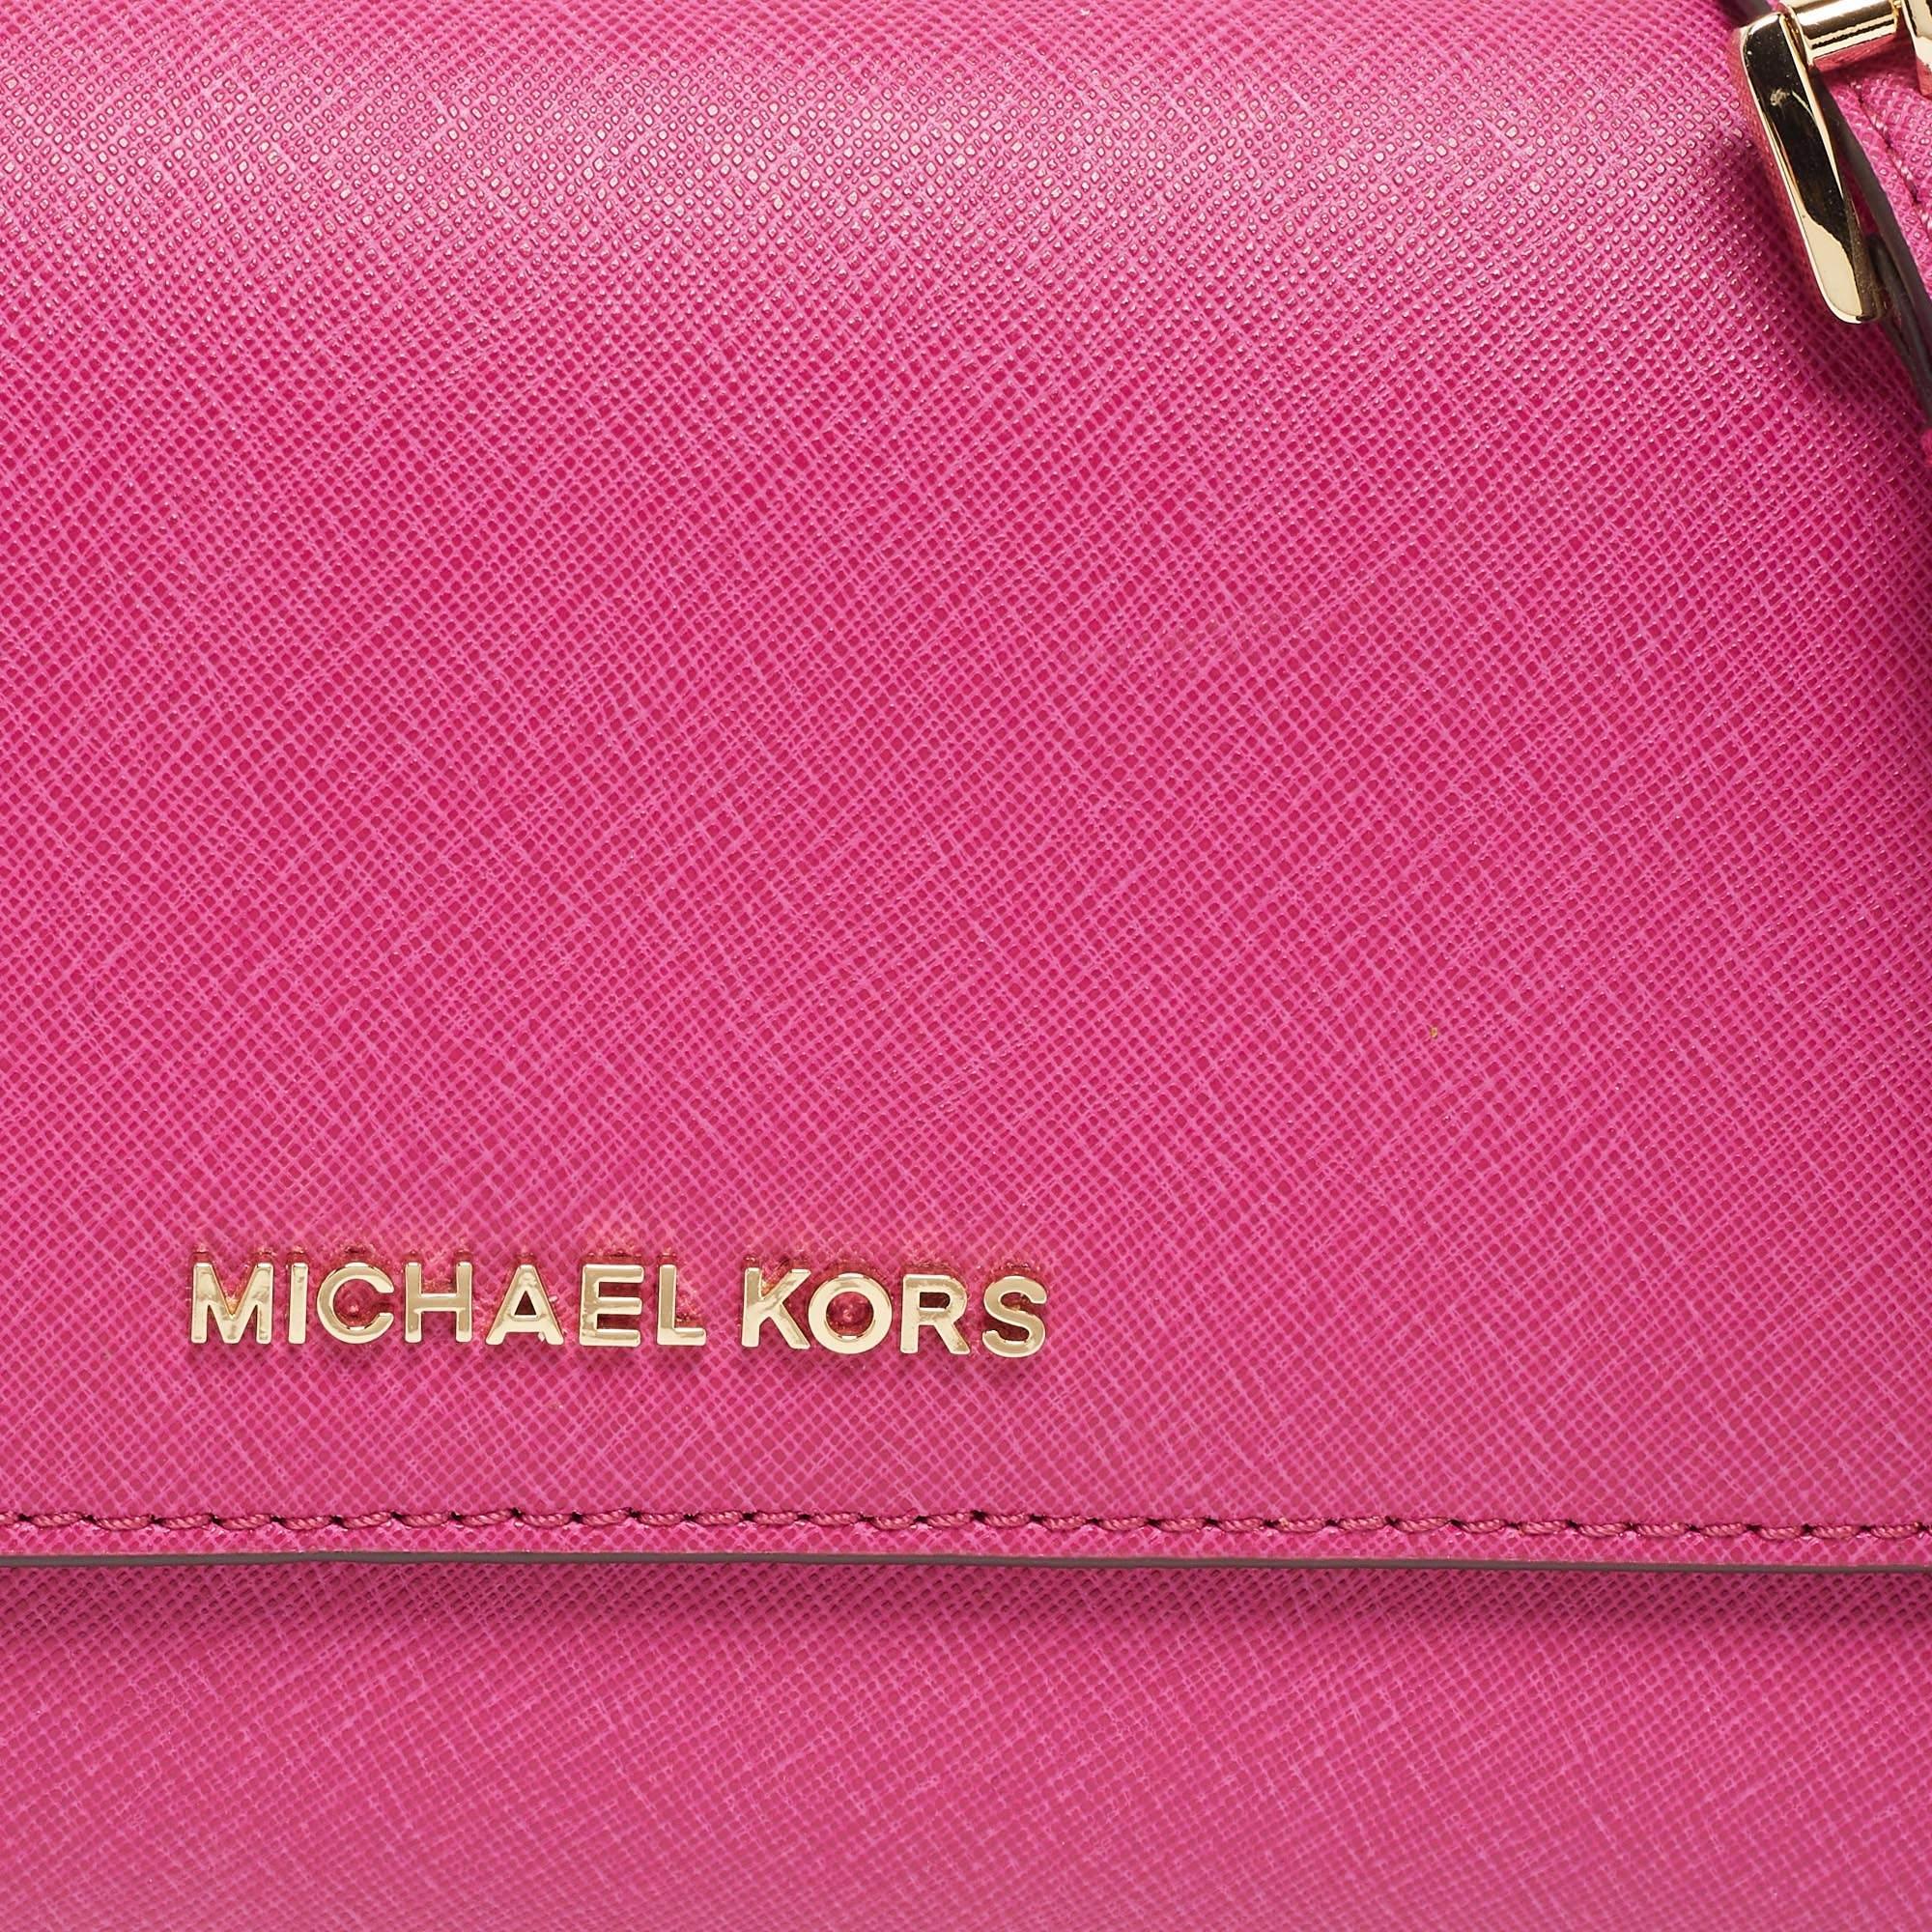 Michael Kors Pink Saffiano Leather Flap 3in1 Crossbody Bag 6